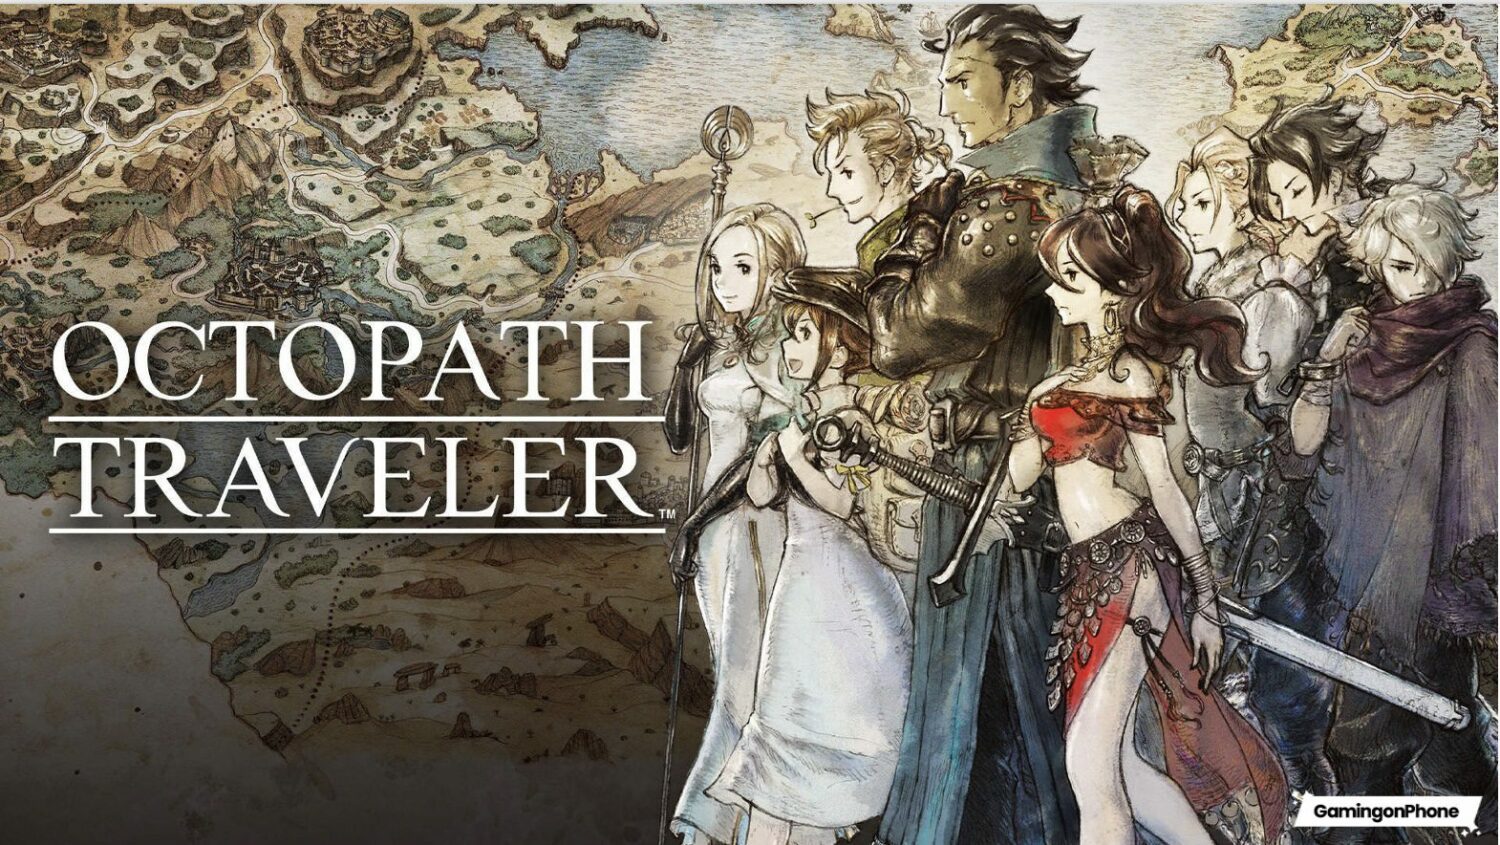 SQUARE ENIX  The Official SQUARE ENIX Website - Pre-register now for  _OCTOPATH TRAVELER: Champions of the Continent_!